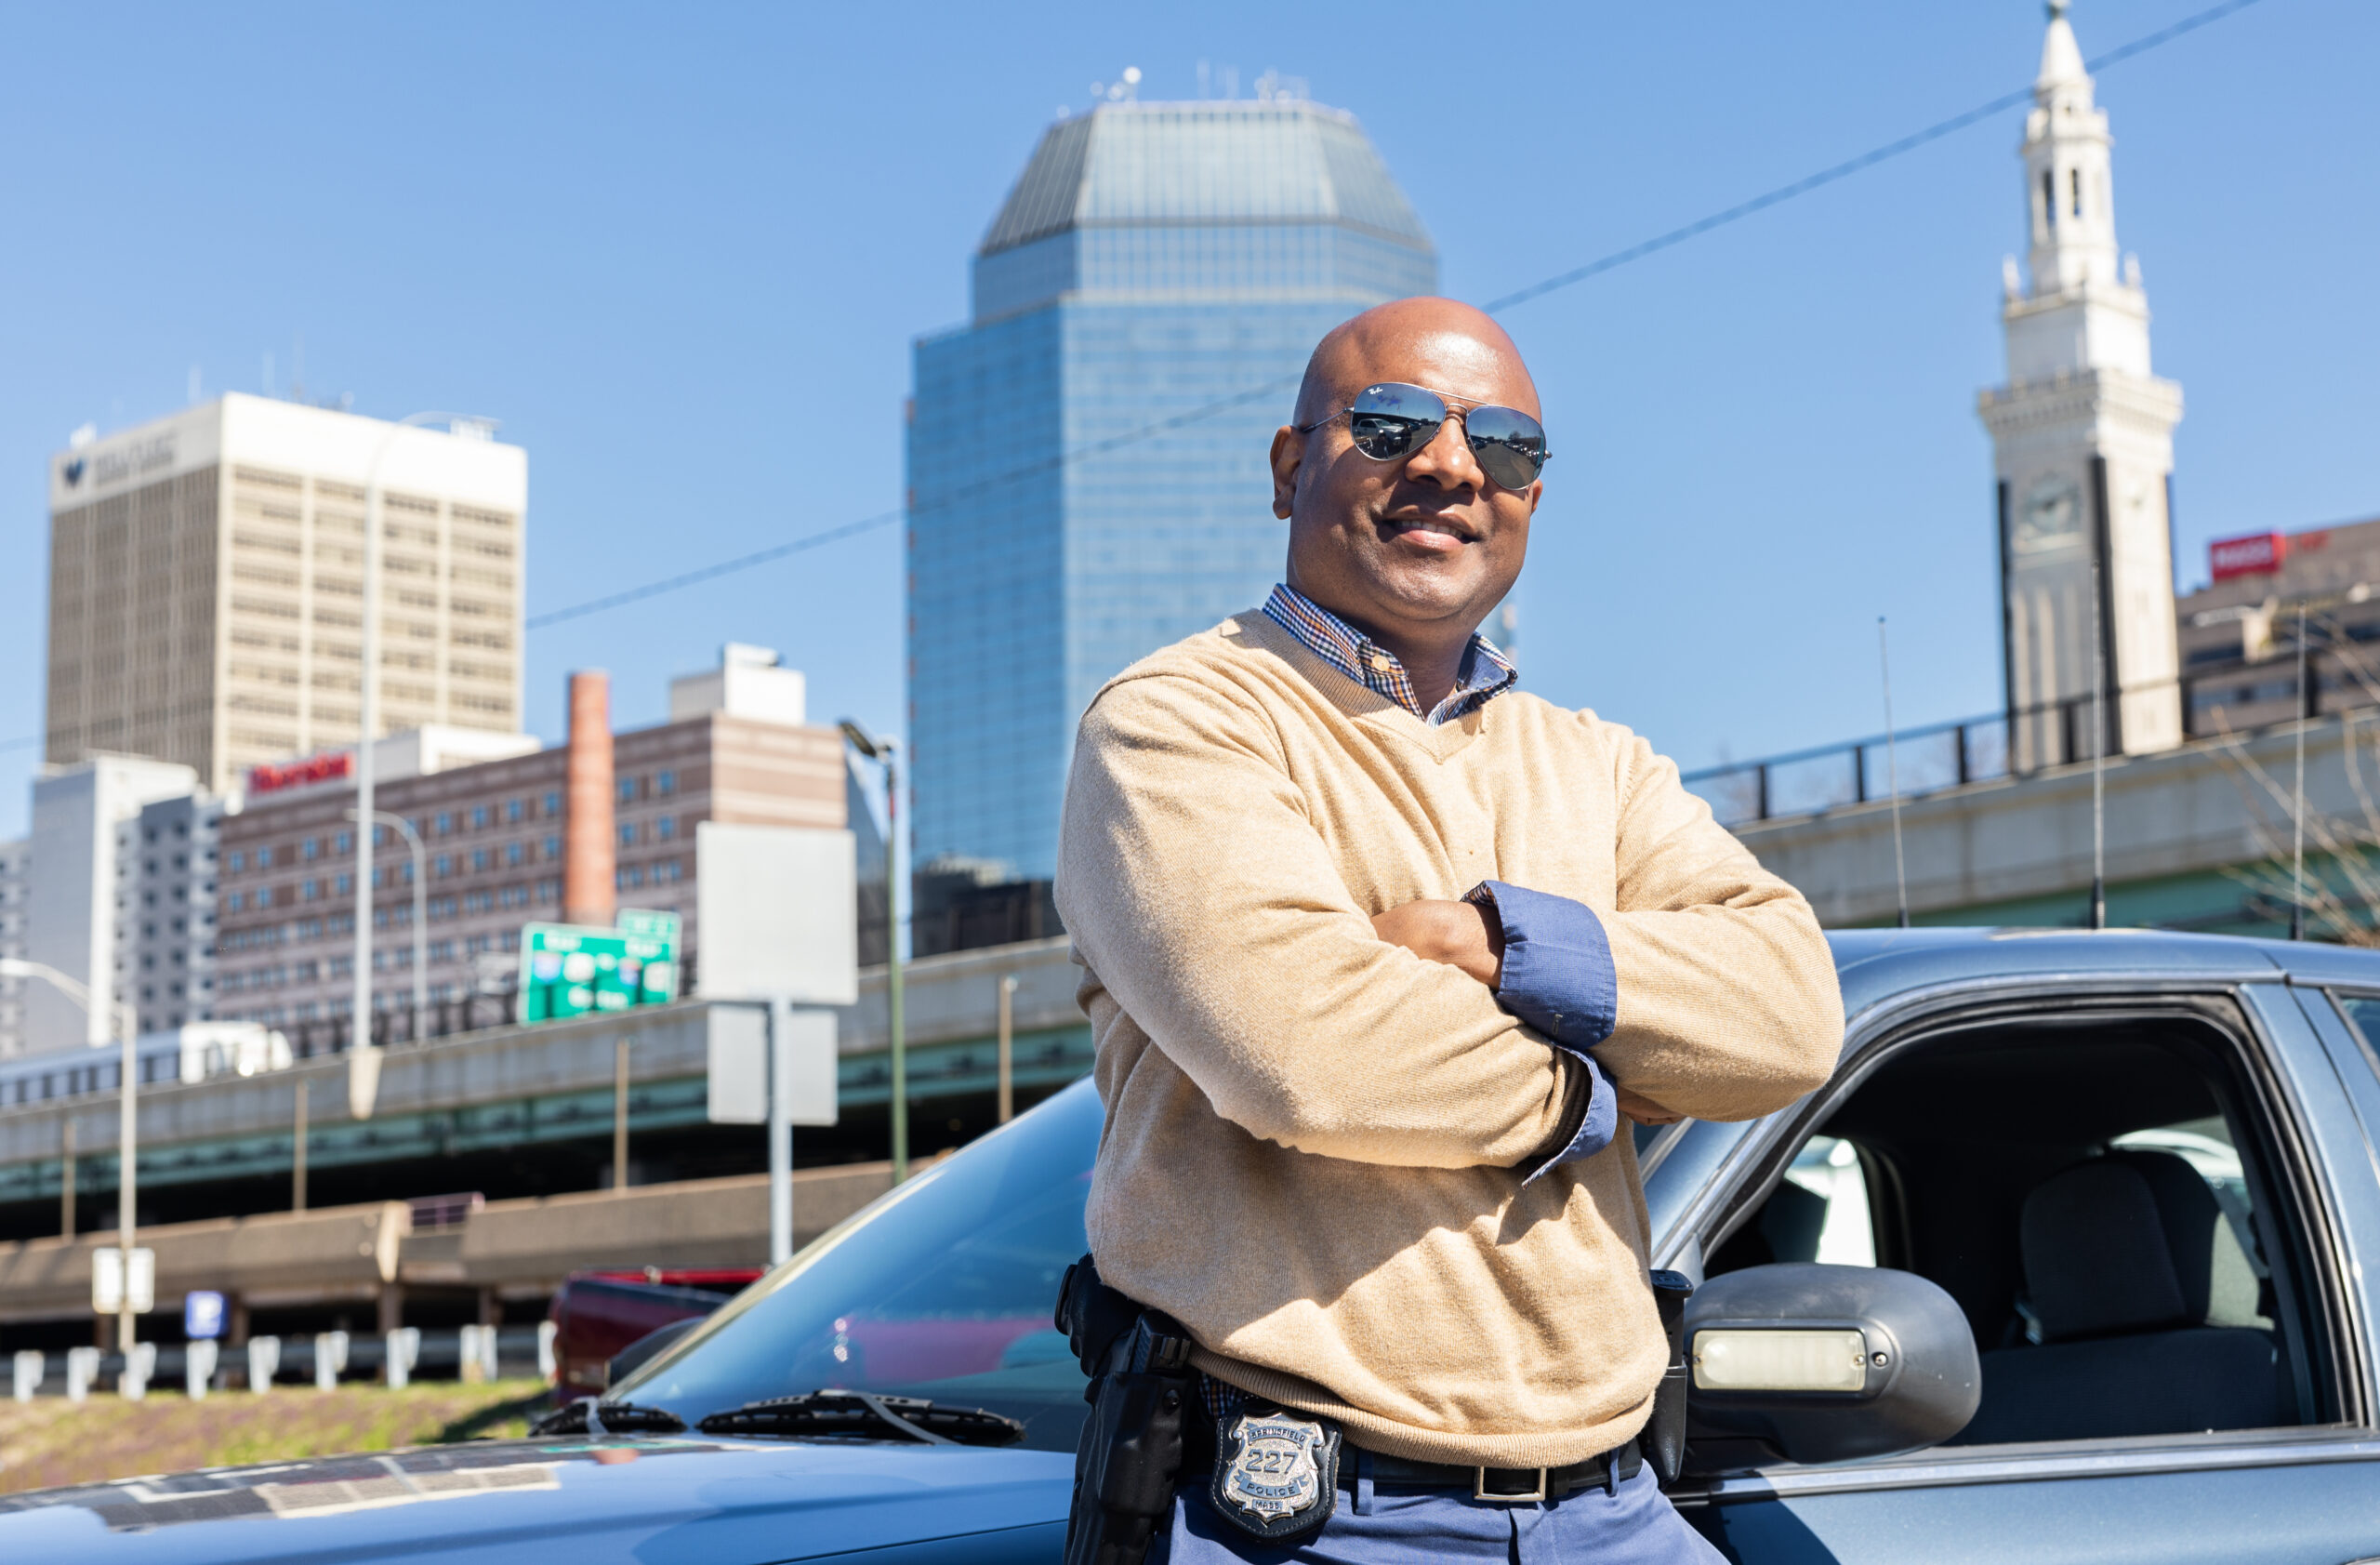 Orette leans on his police cruiser in front of the Springfield skyline.